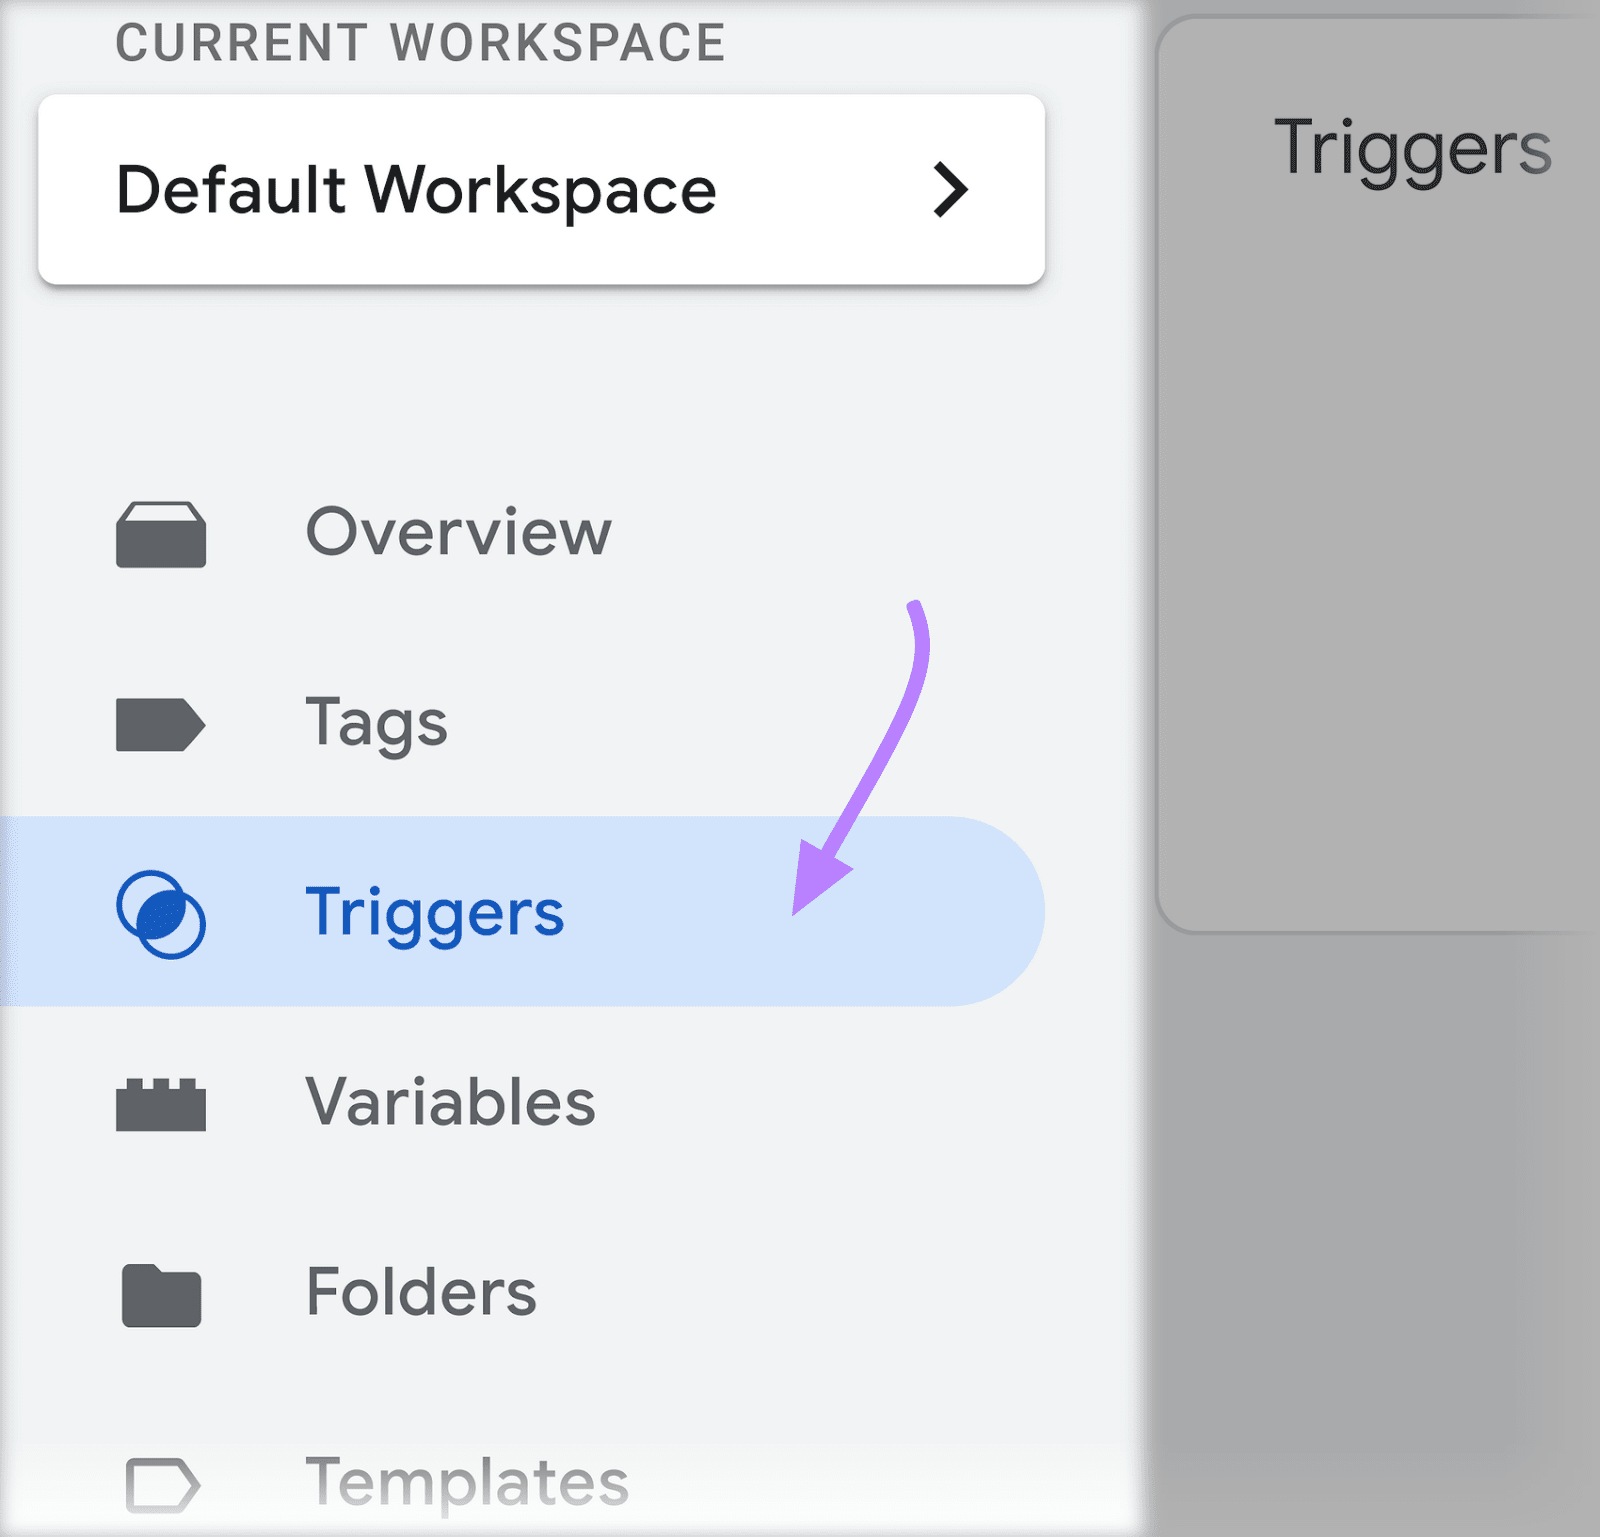 “Triggers” selected from the left-hand navigation in GTM